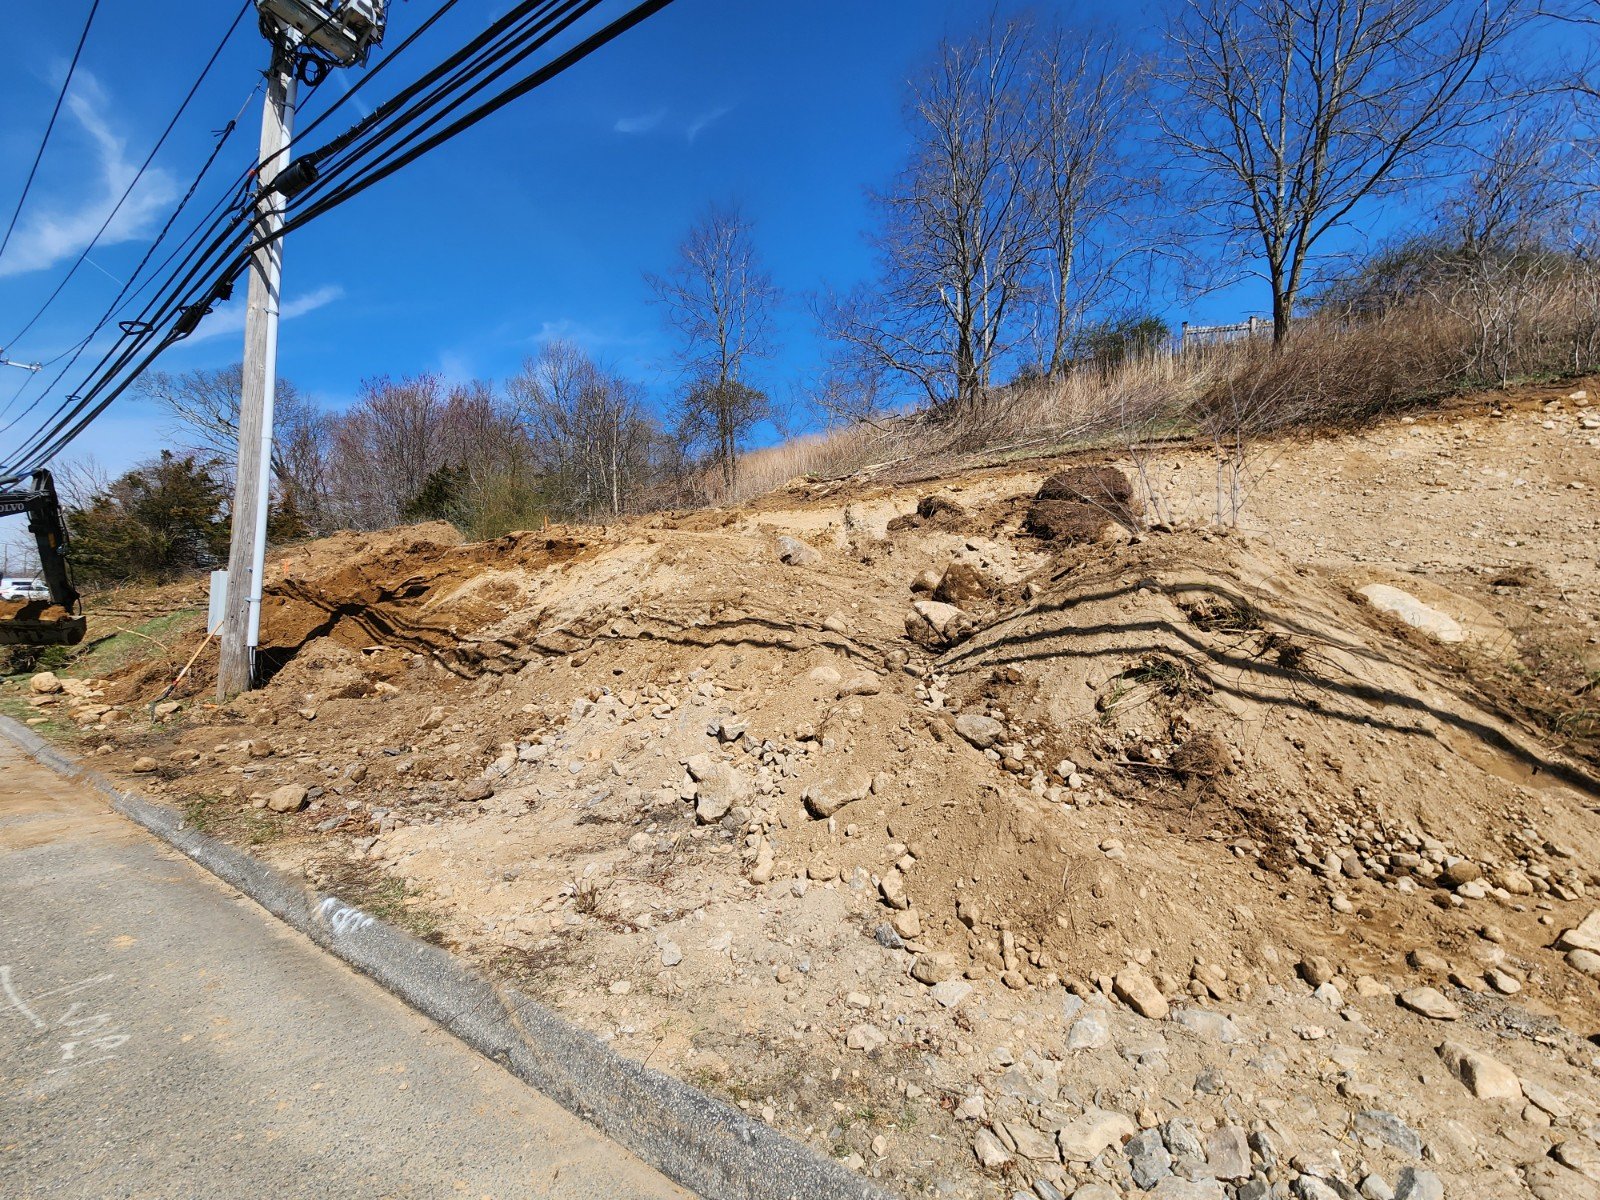 Earth excavation for roadway widening and utility pole relocation - Flanders Road (Route 161 NB)